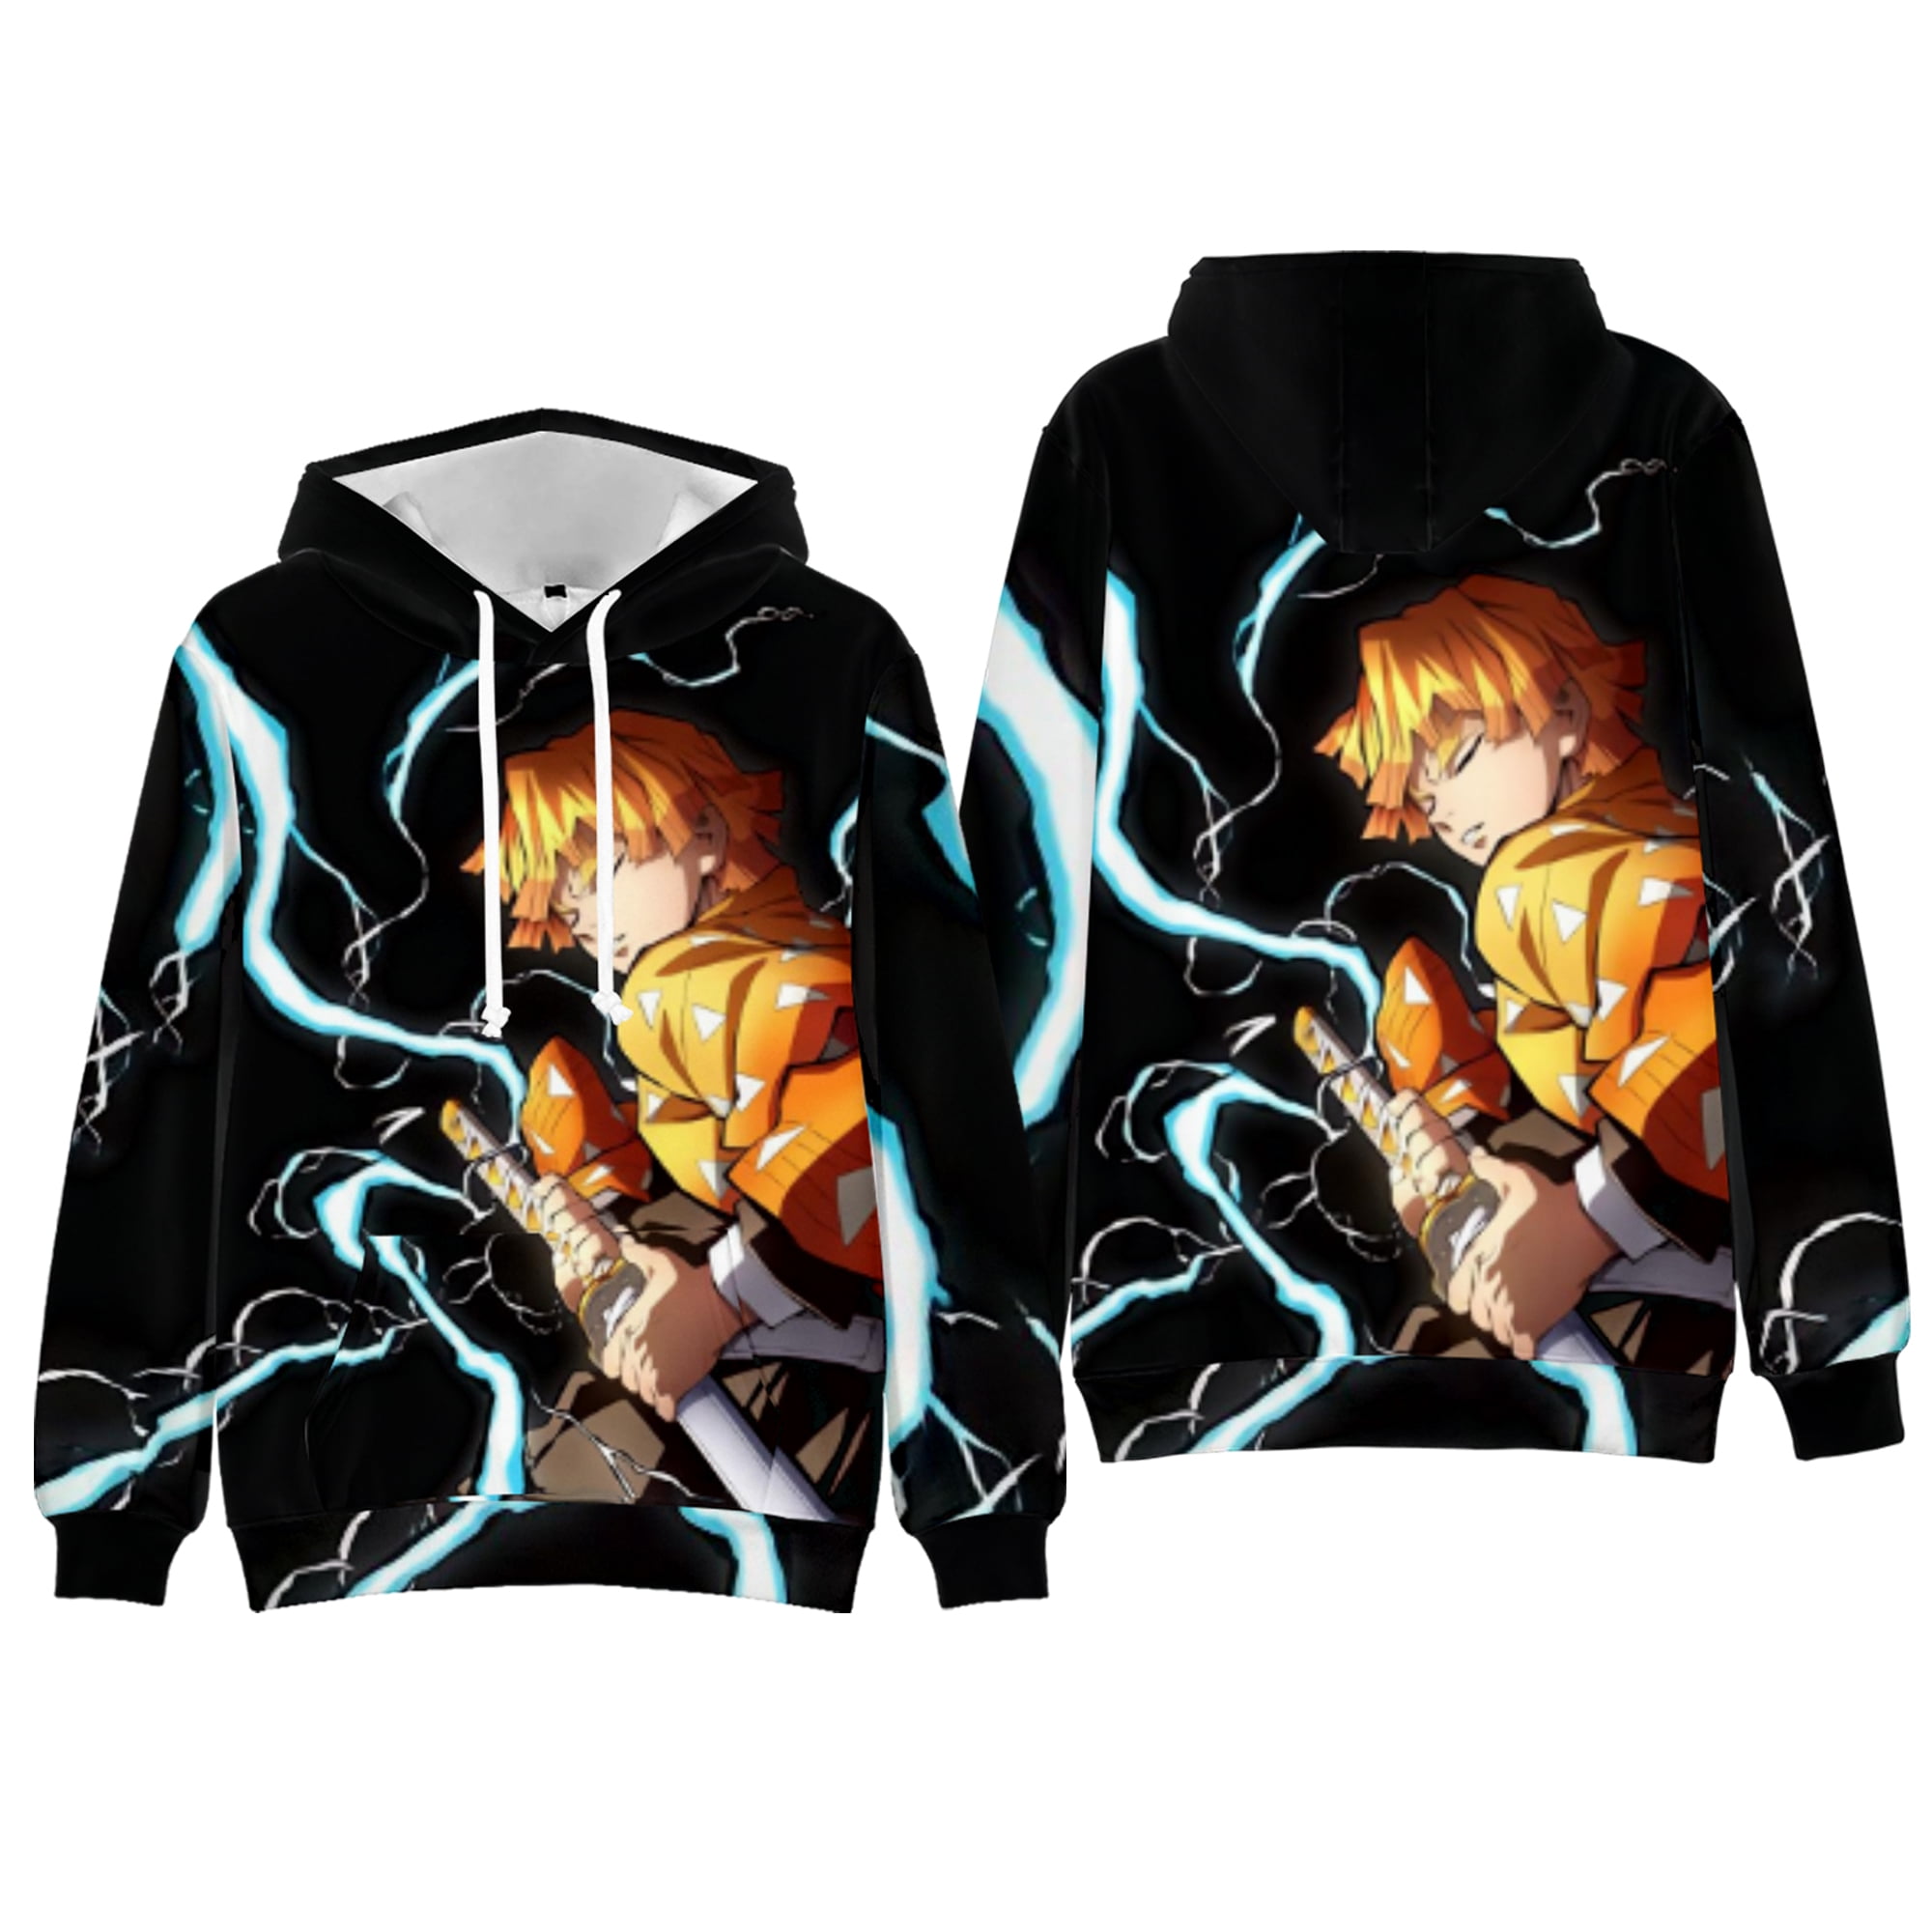 Manga and Anime Leather Jackets | Luca Designs